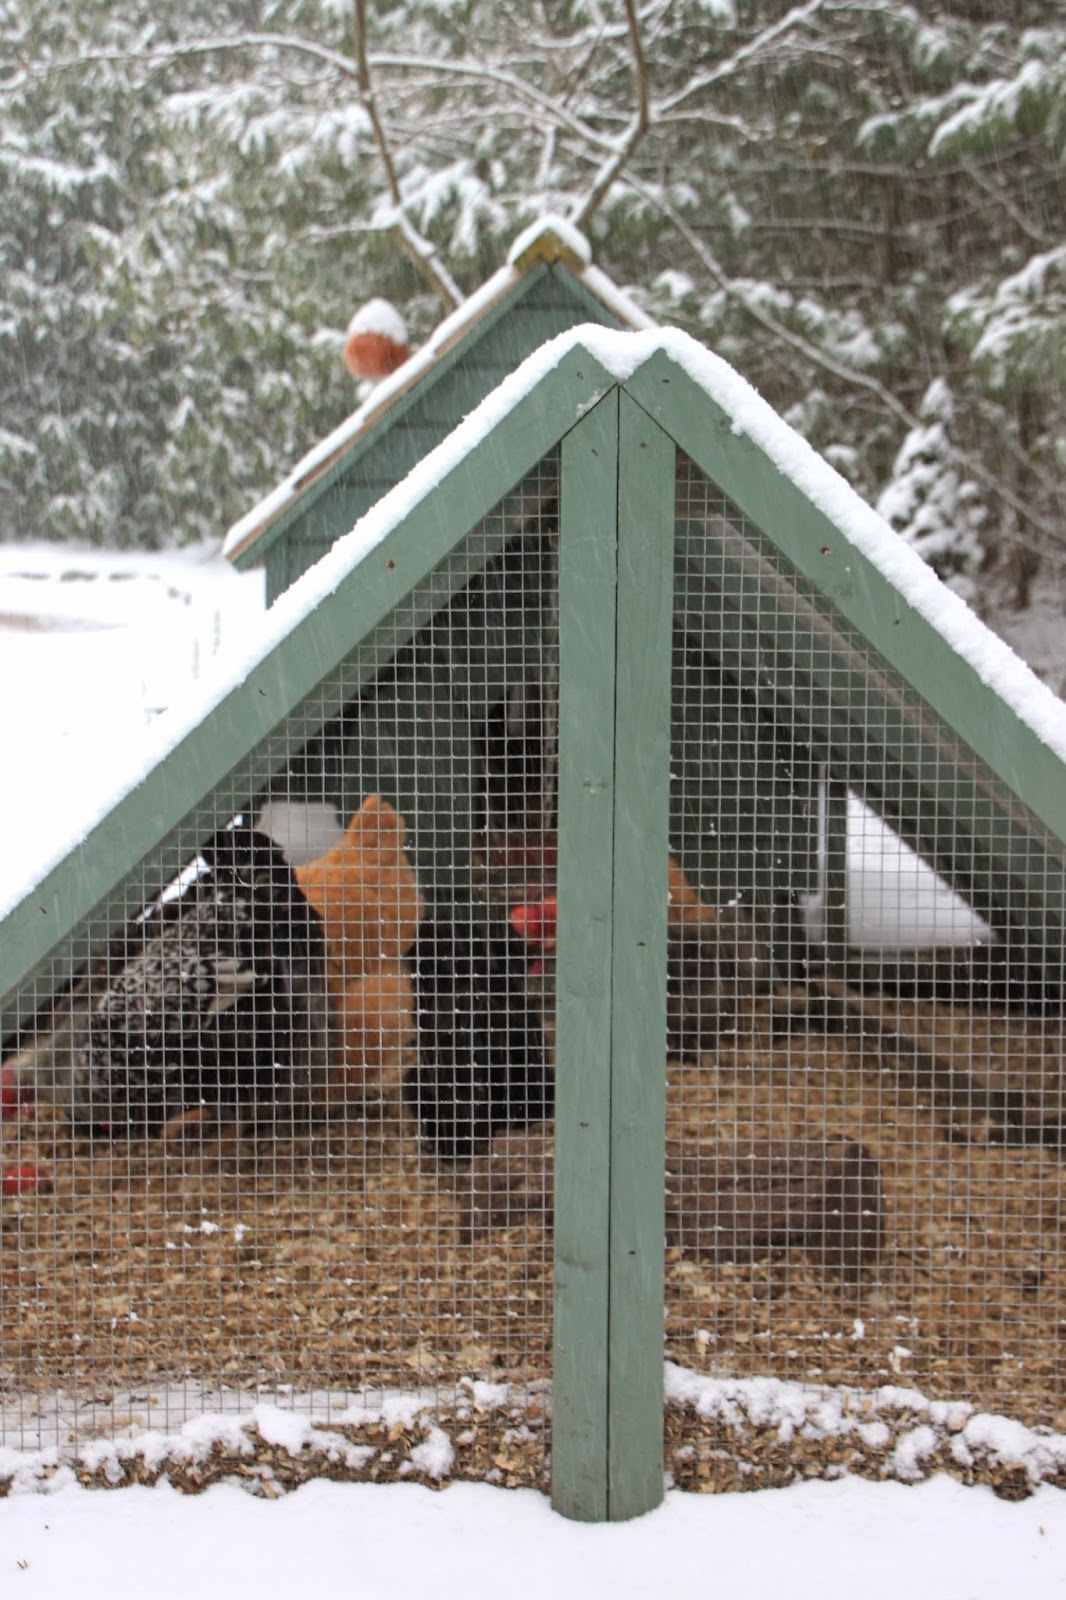 14 Thoughts on Heating the Chicken Coop in Winter